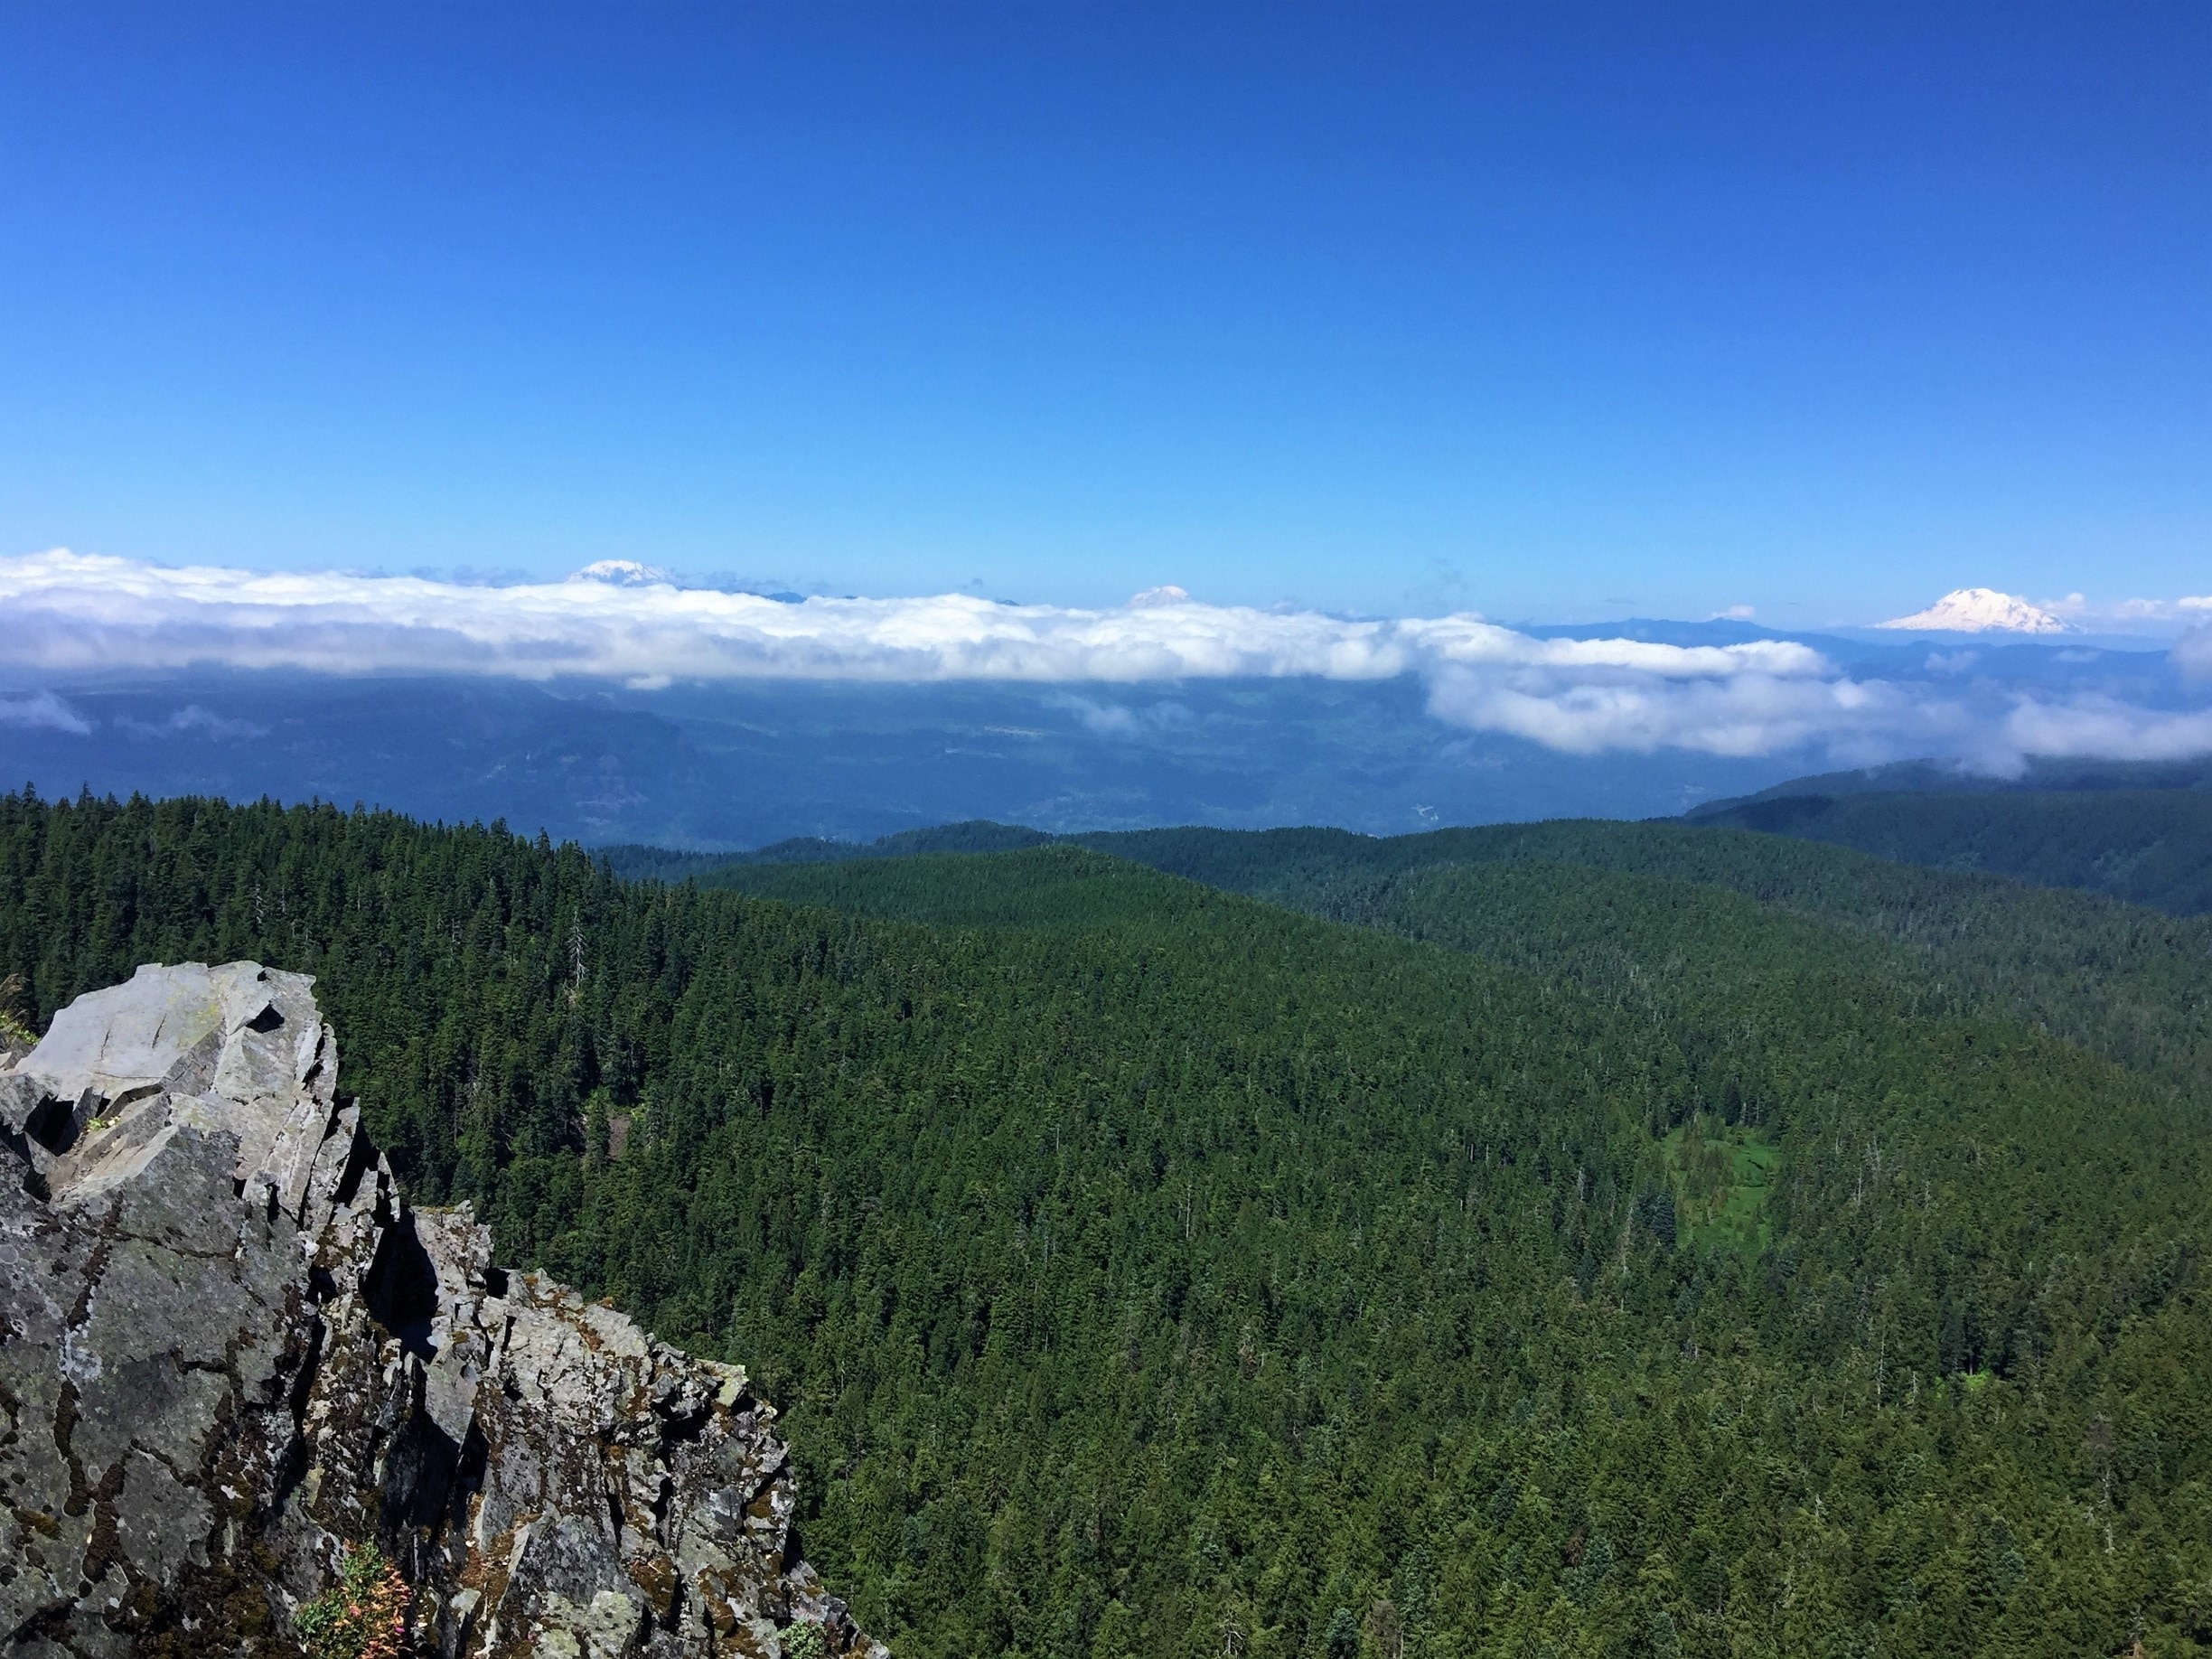 This was taken at the Summit of Larch Mountain. In the distance three terrible beauties can be seen: Mt St Helens, Mt Rainier (my favorite), and Mt Adams.